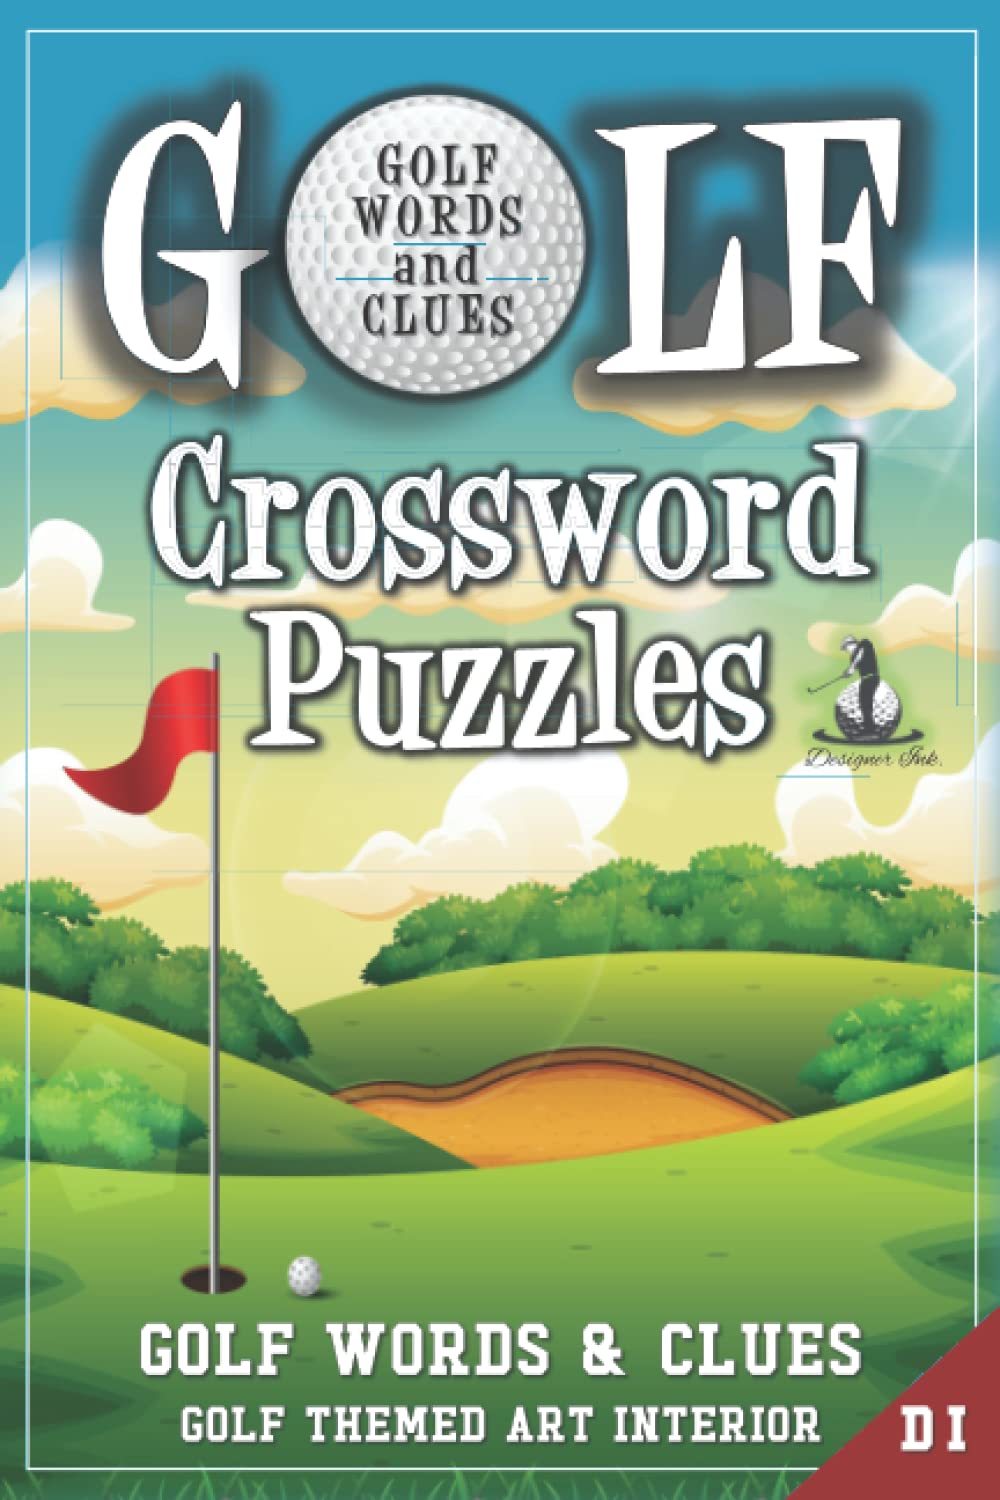 Golf Crossword Puzzles: Golfers, Courses, Terms, Legends. Golfing Sports Interior. Easy to Hard Words. ALL AGES Activity.